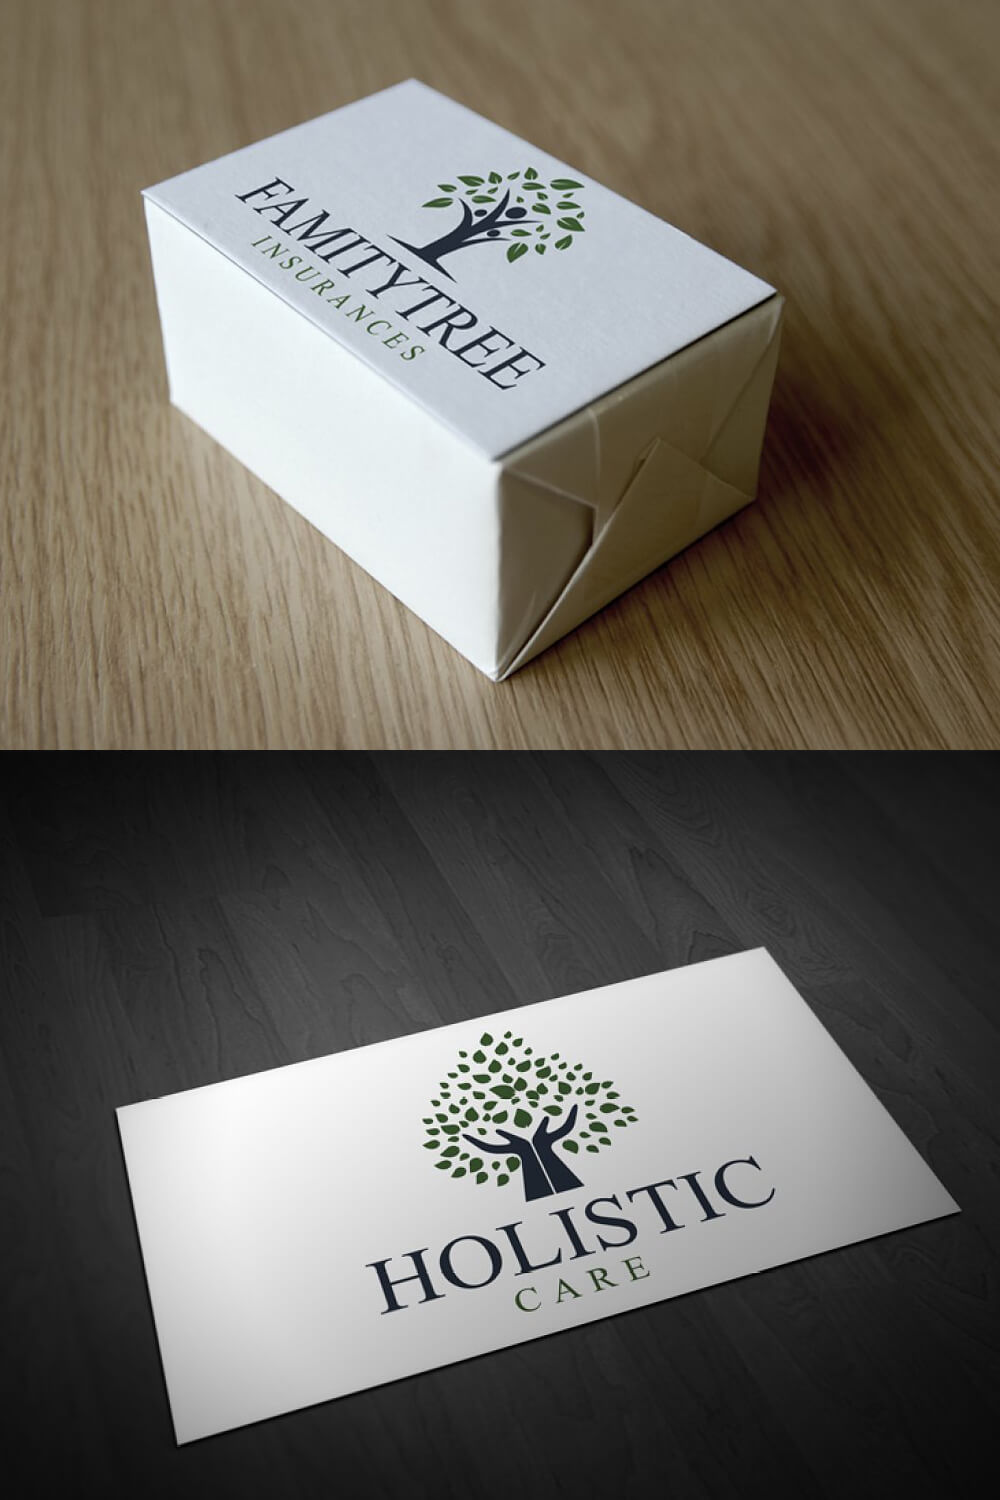 A business card with image tree and inscription "Holistic Care".